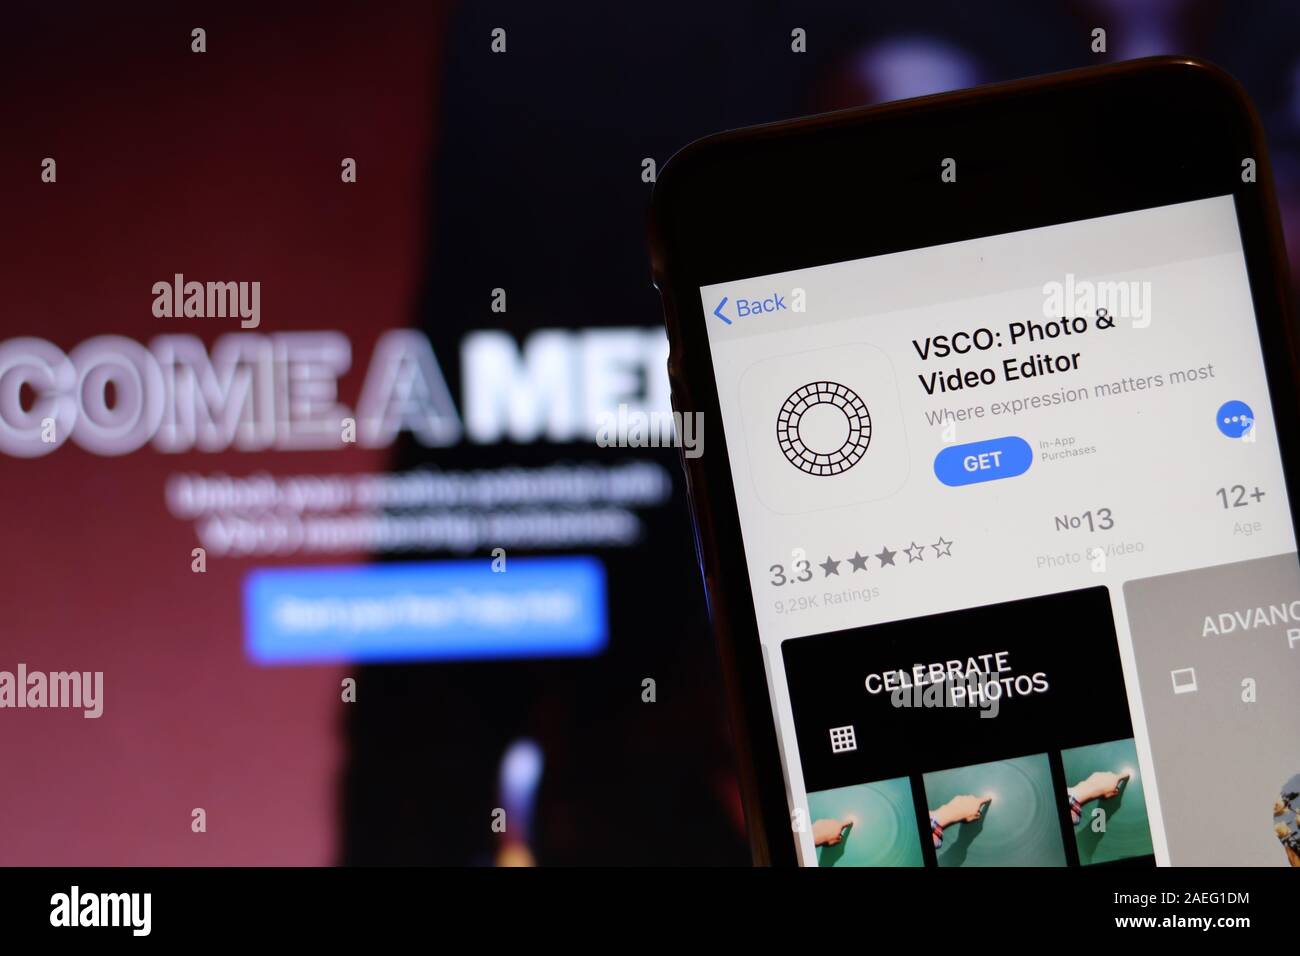 Los Angeles, California, USA - 26 November 2019: VSCO icon on phone screen with logo on blurry background, Illustrative Editorial. Stock Photo